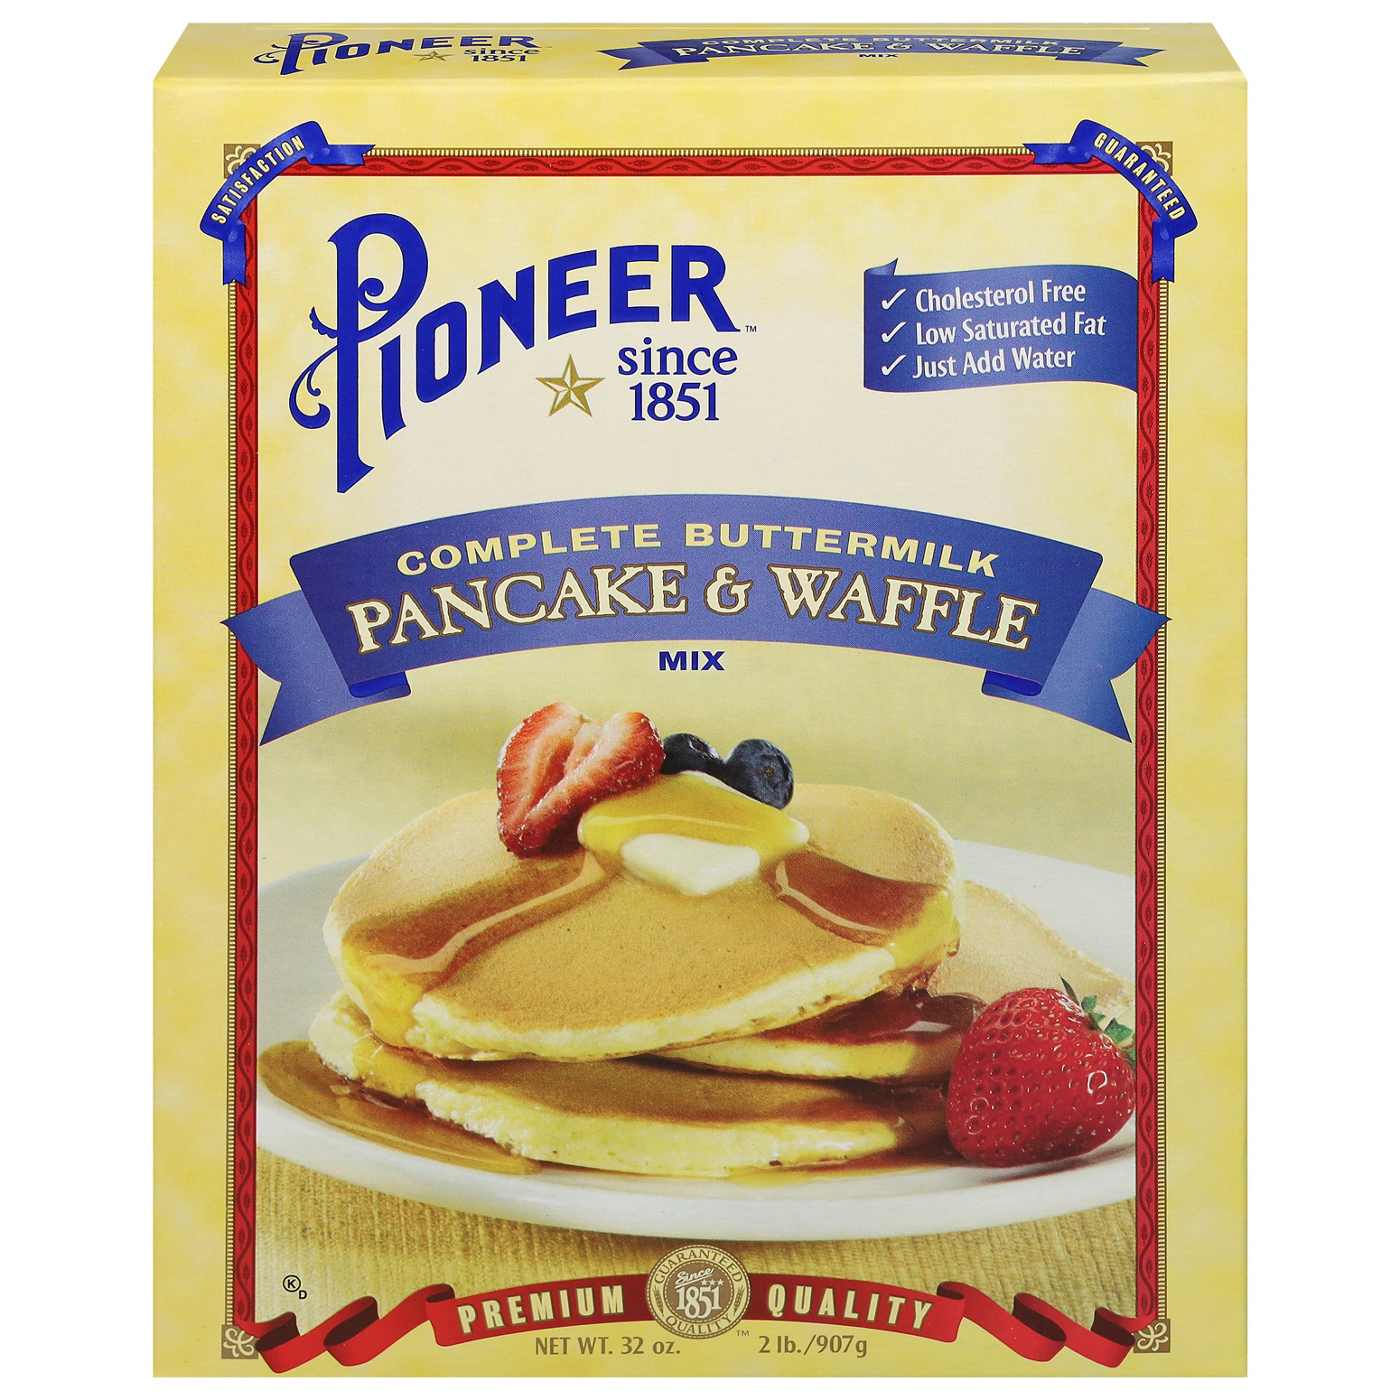 Pioneer Brand Complete Buttermilk Pancake & Waffle Mix; image 1 of 2